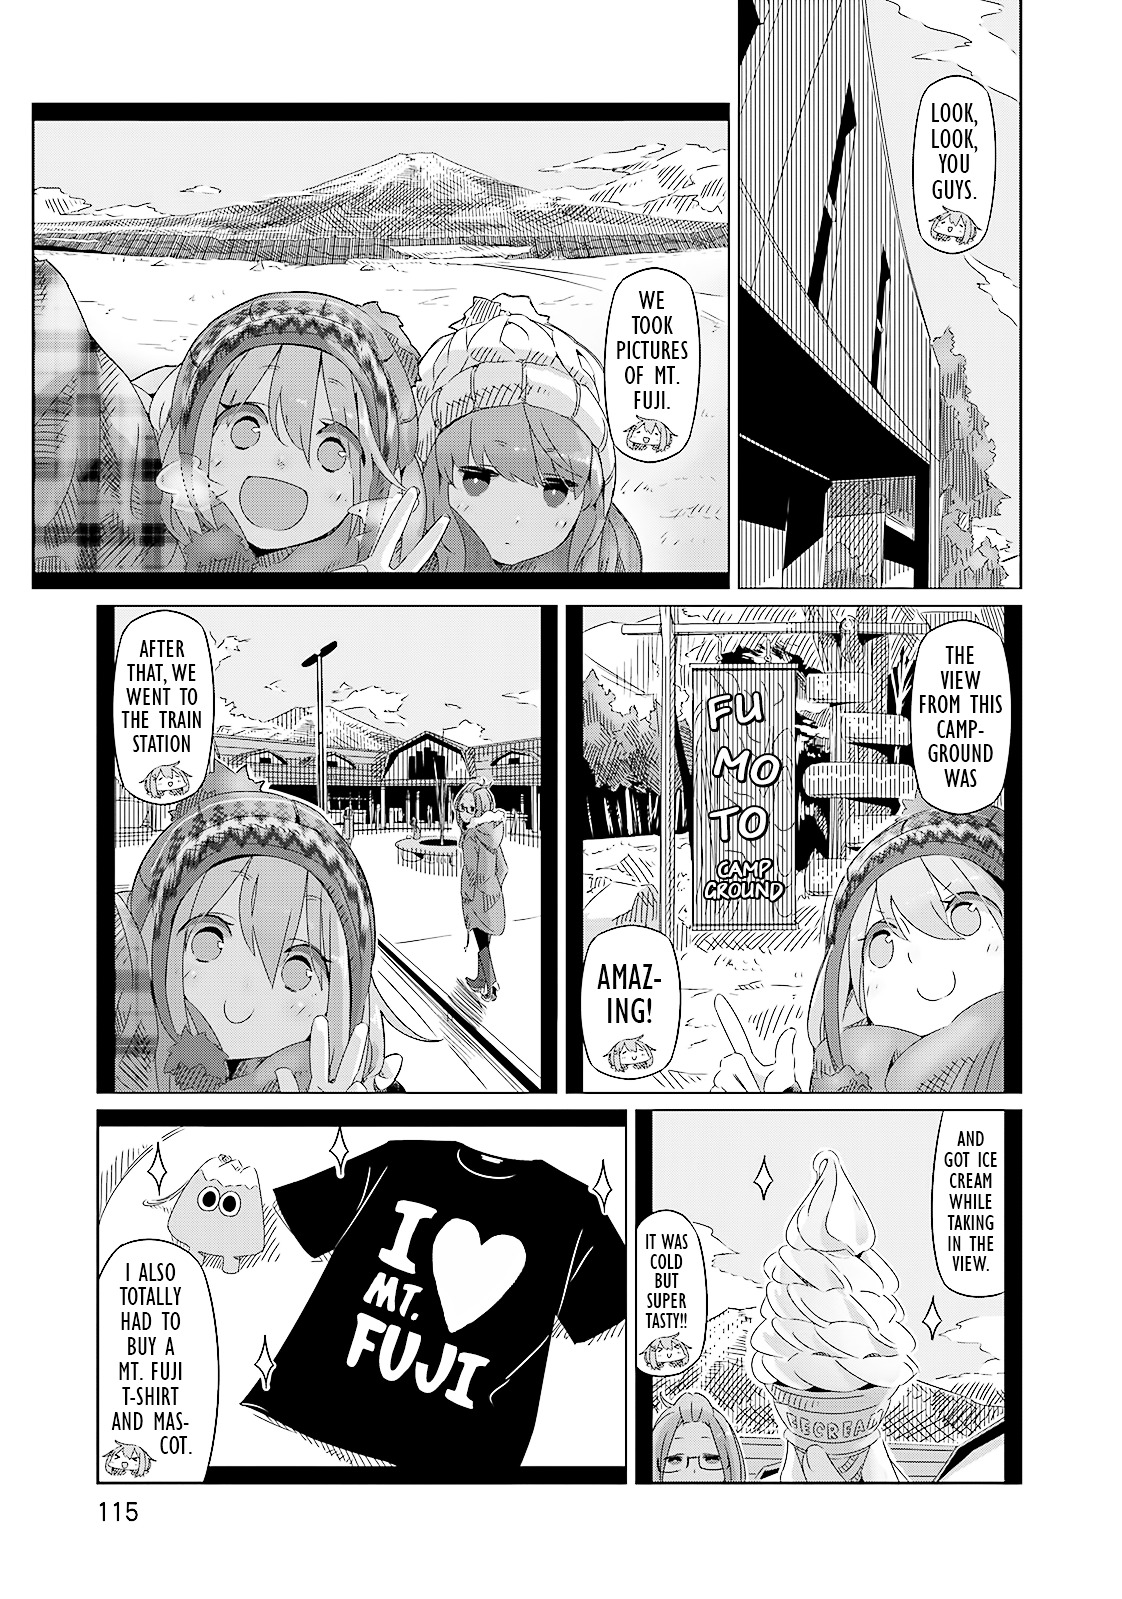 Yurucamp Chapter 5 : Camping Starts With Gathering Gear - Picture 1